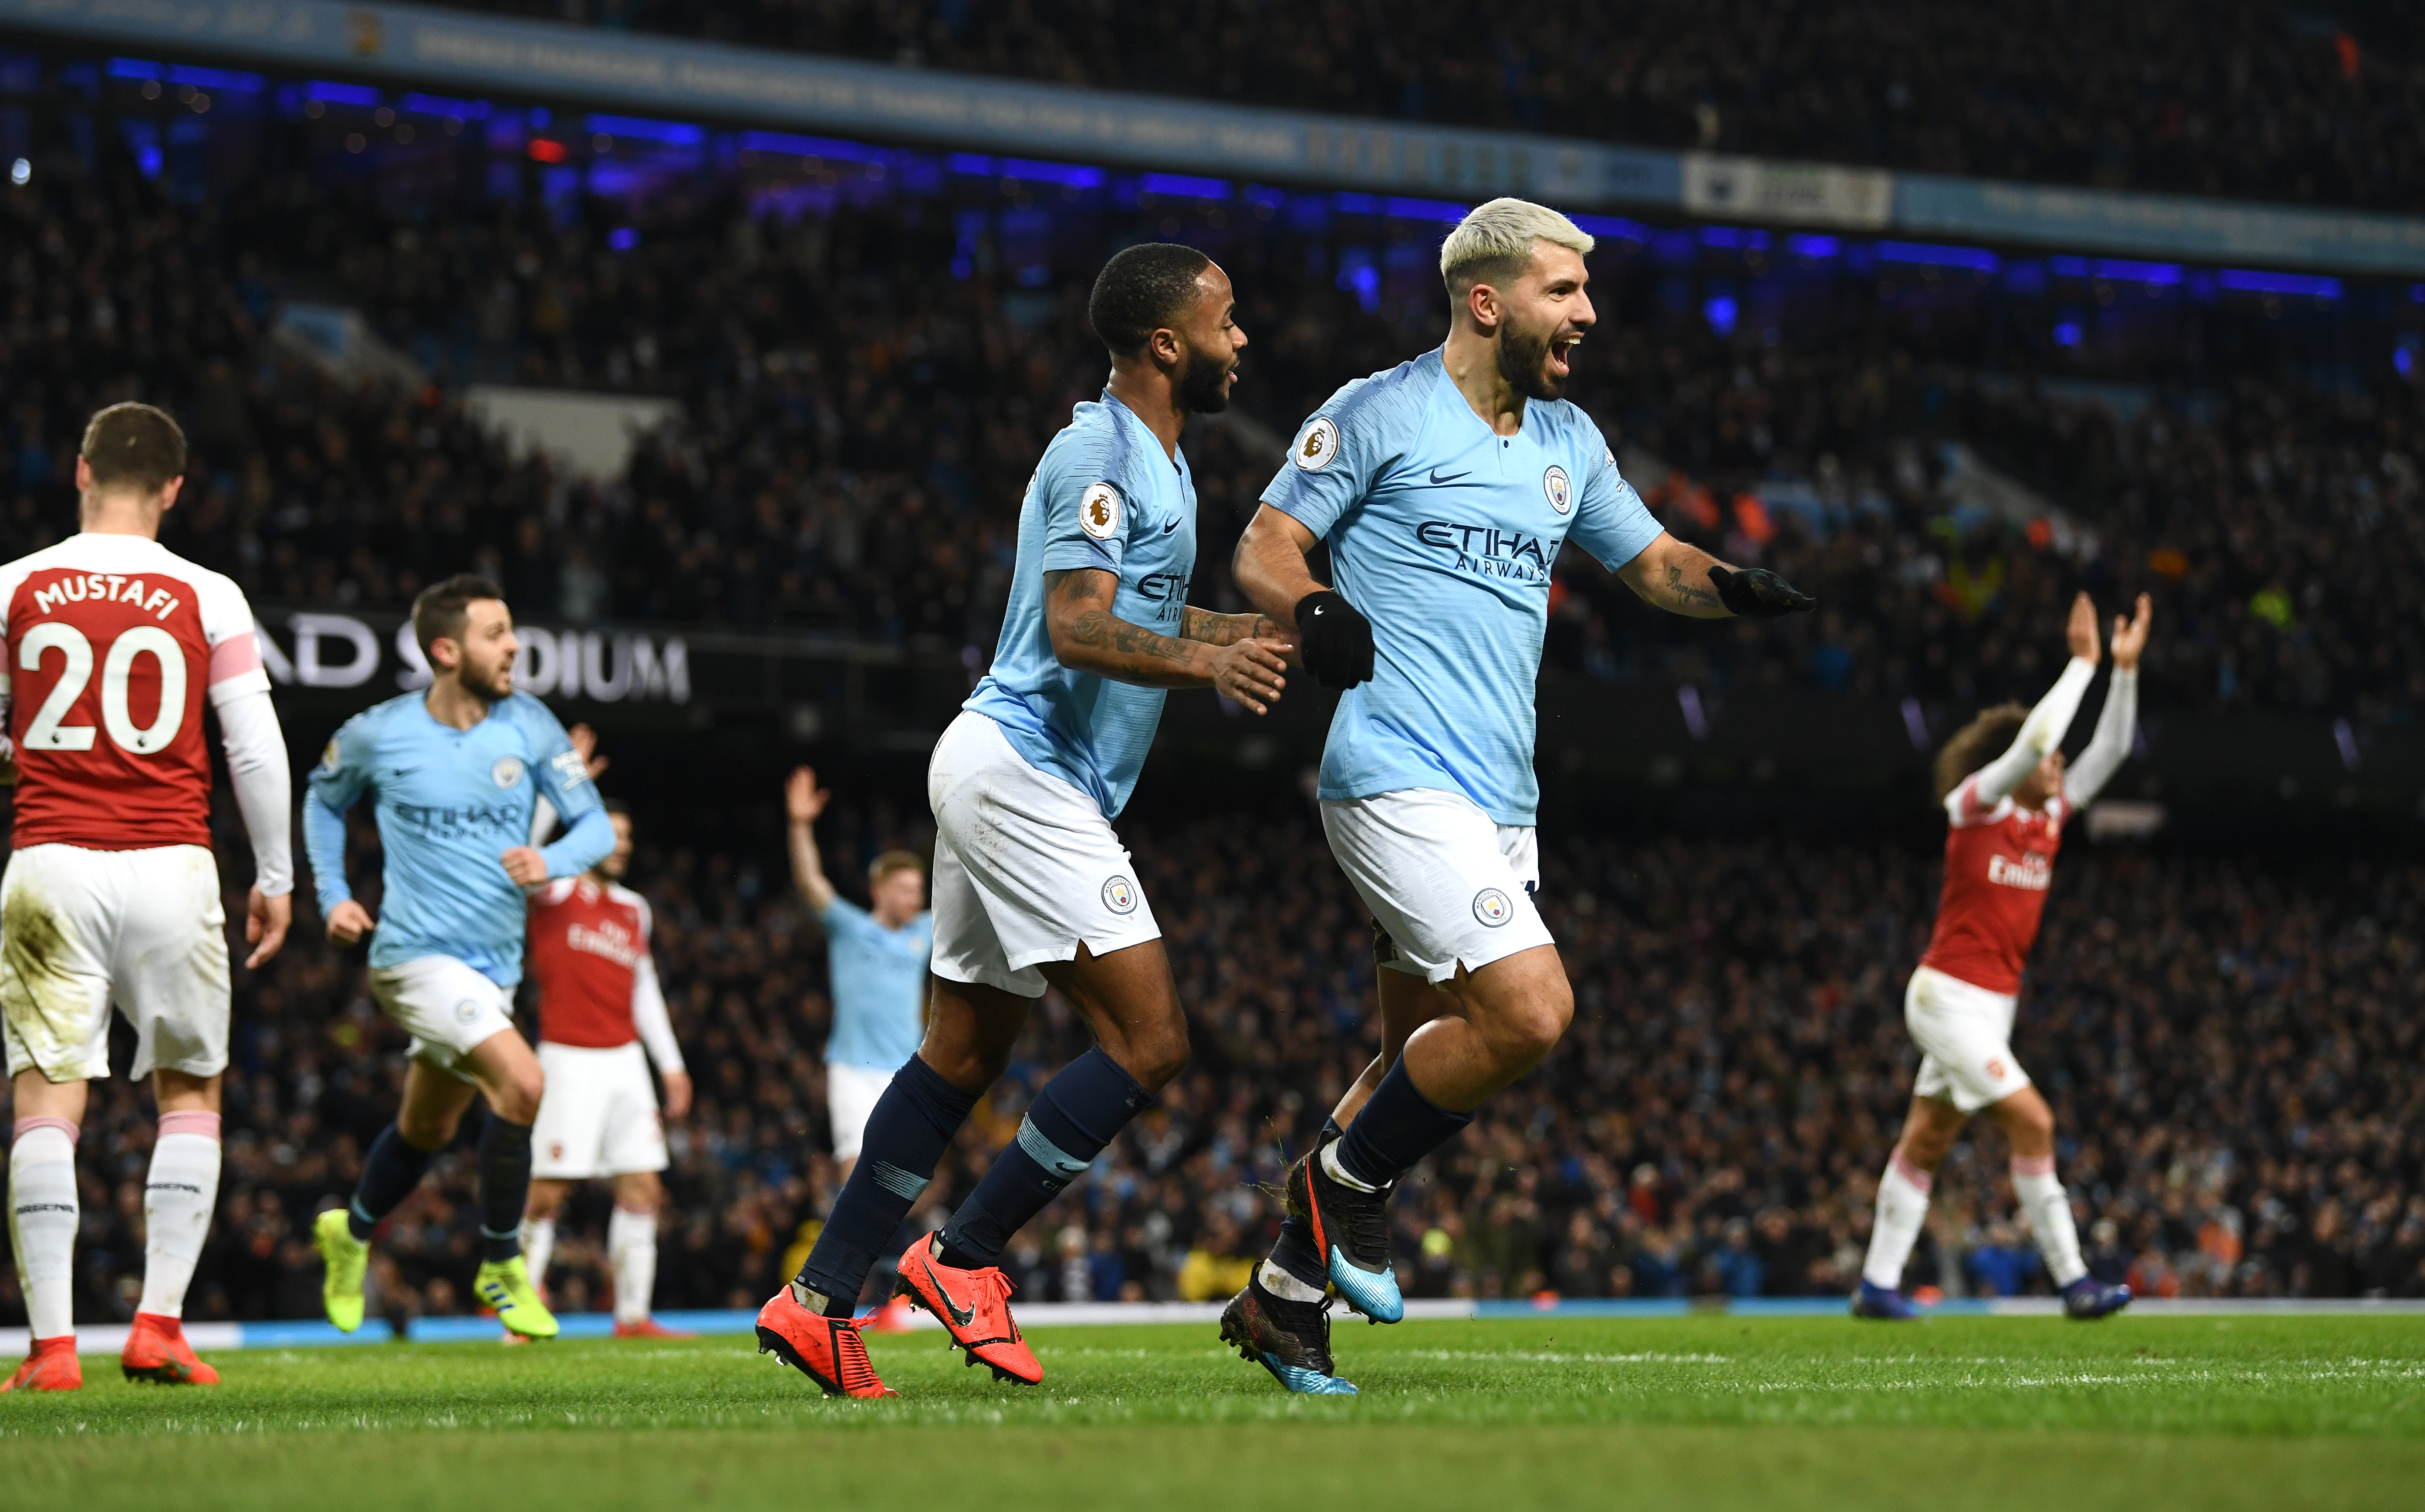 MANCHESTER, ENGLAND - FEBRUARY 03: Manchester City striker Sergio Aguero (r) celebrates with Raheem Sterling after scoring his hat trick goal despite the efforts of Arsenal goalkeeper Bernd Leno and Laurent Koscielny during the Premier League match between Manchester City and Arsenal FC at Etihad Stadium on February 03, 2019 in Manchester, United Kingdom. (Photo by Stu Forster/Getty Images)